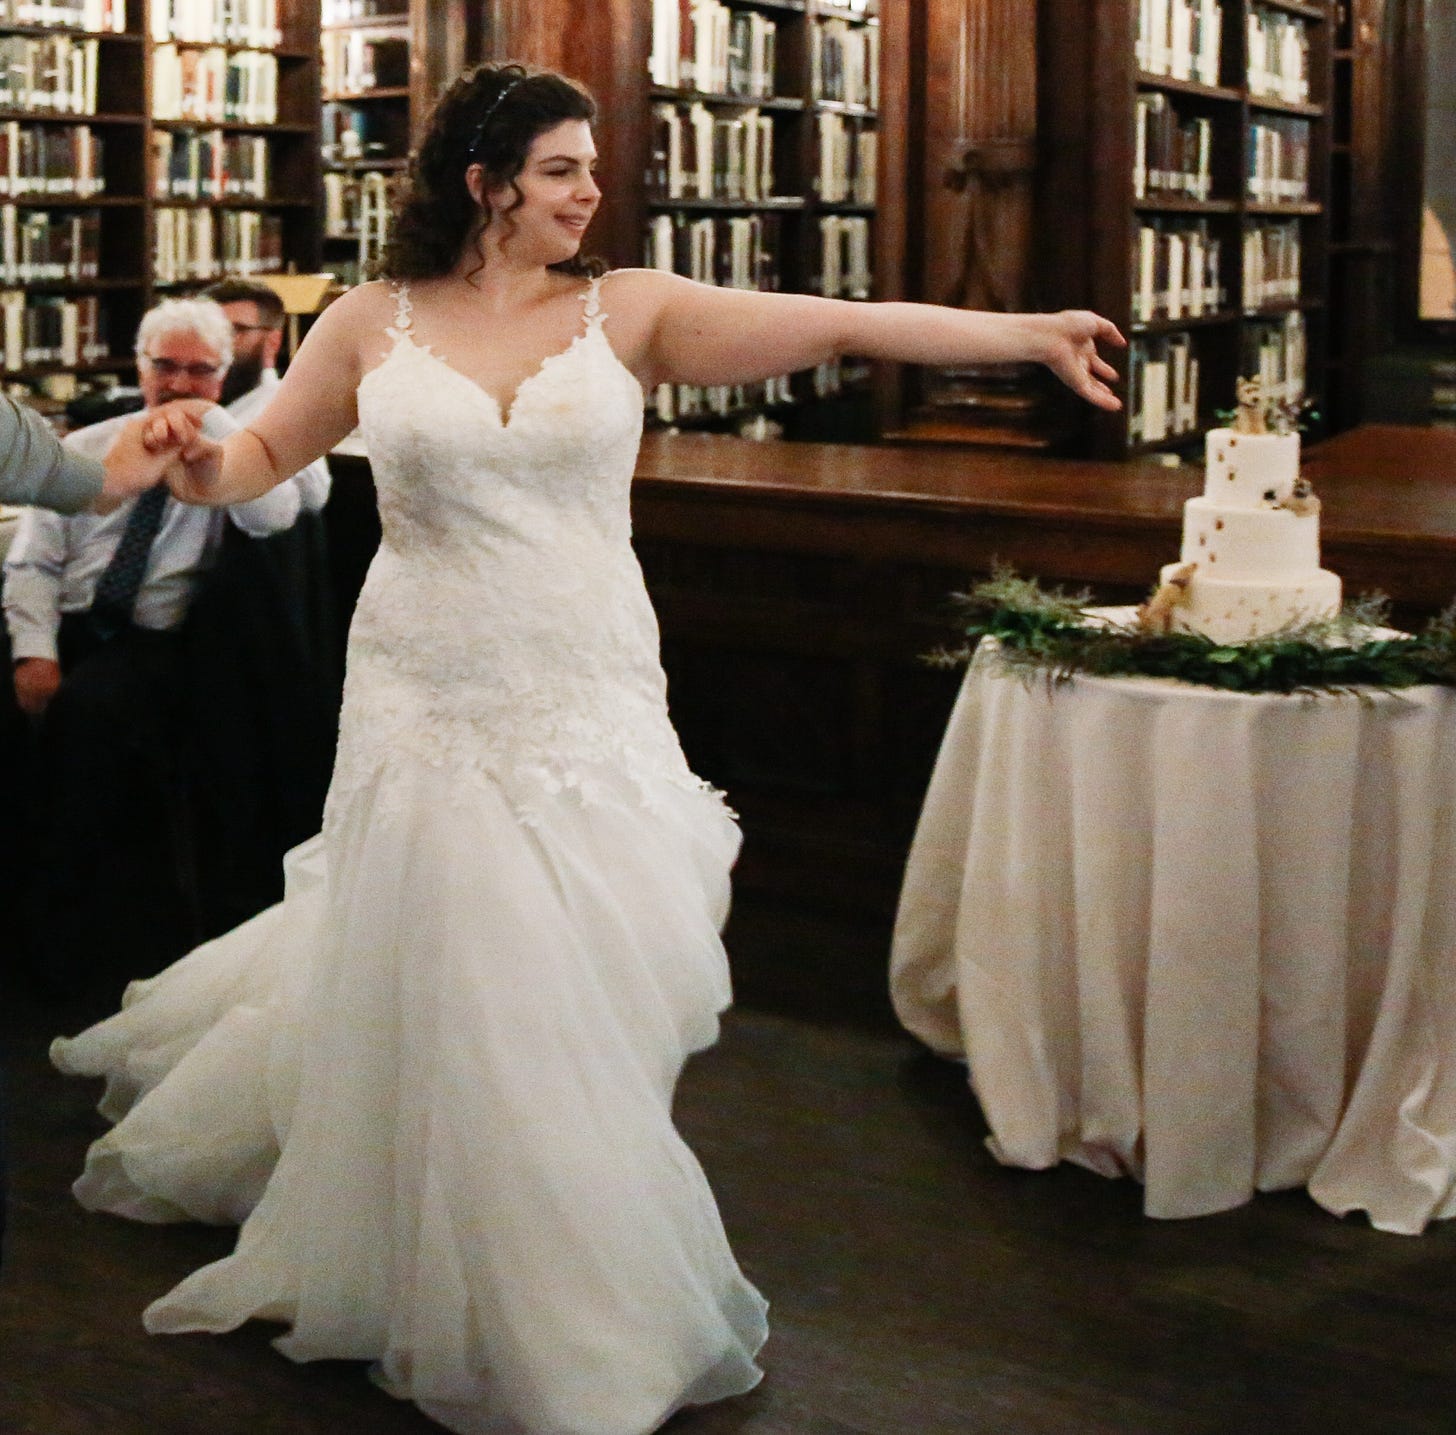 A woman in a wedding dress dances in a library